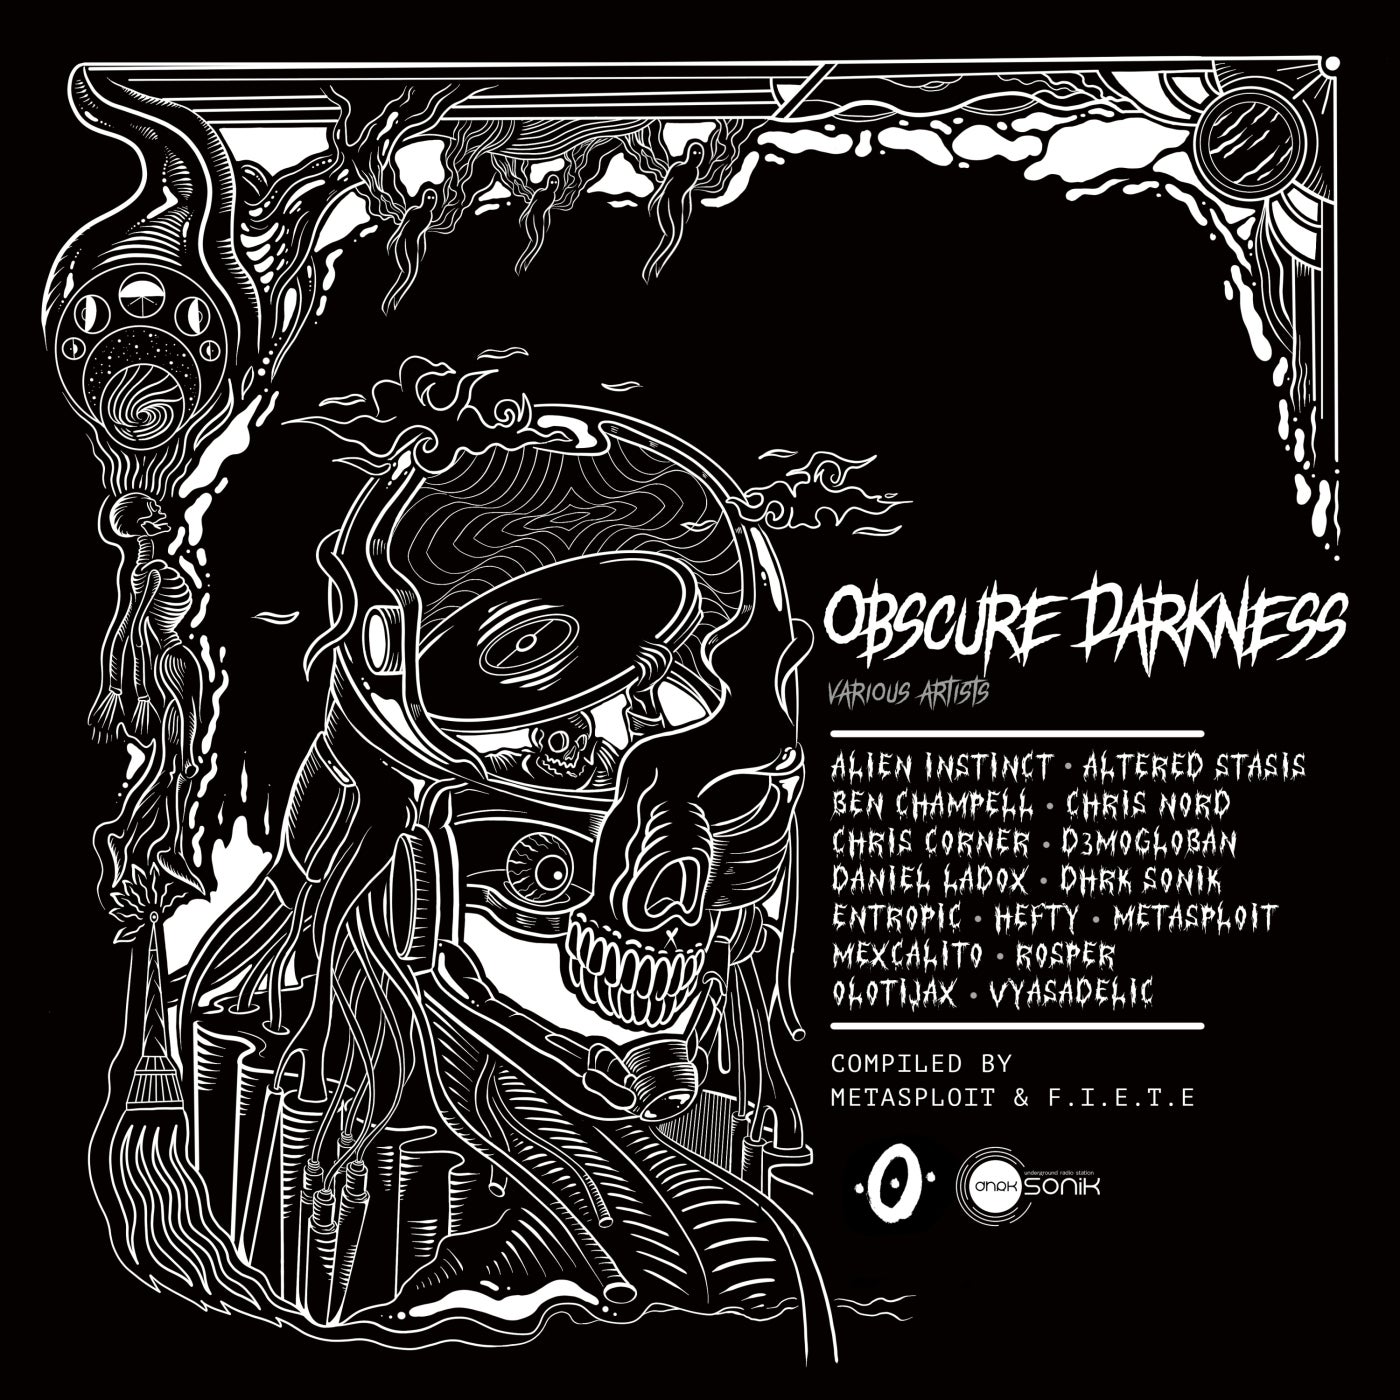 Obscure III : Obscure Darkness V.A